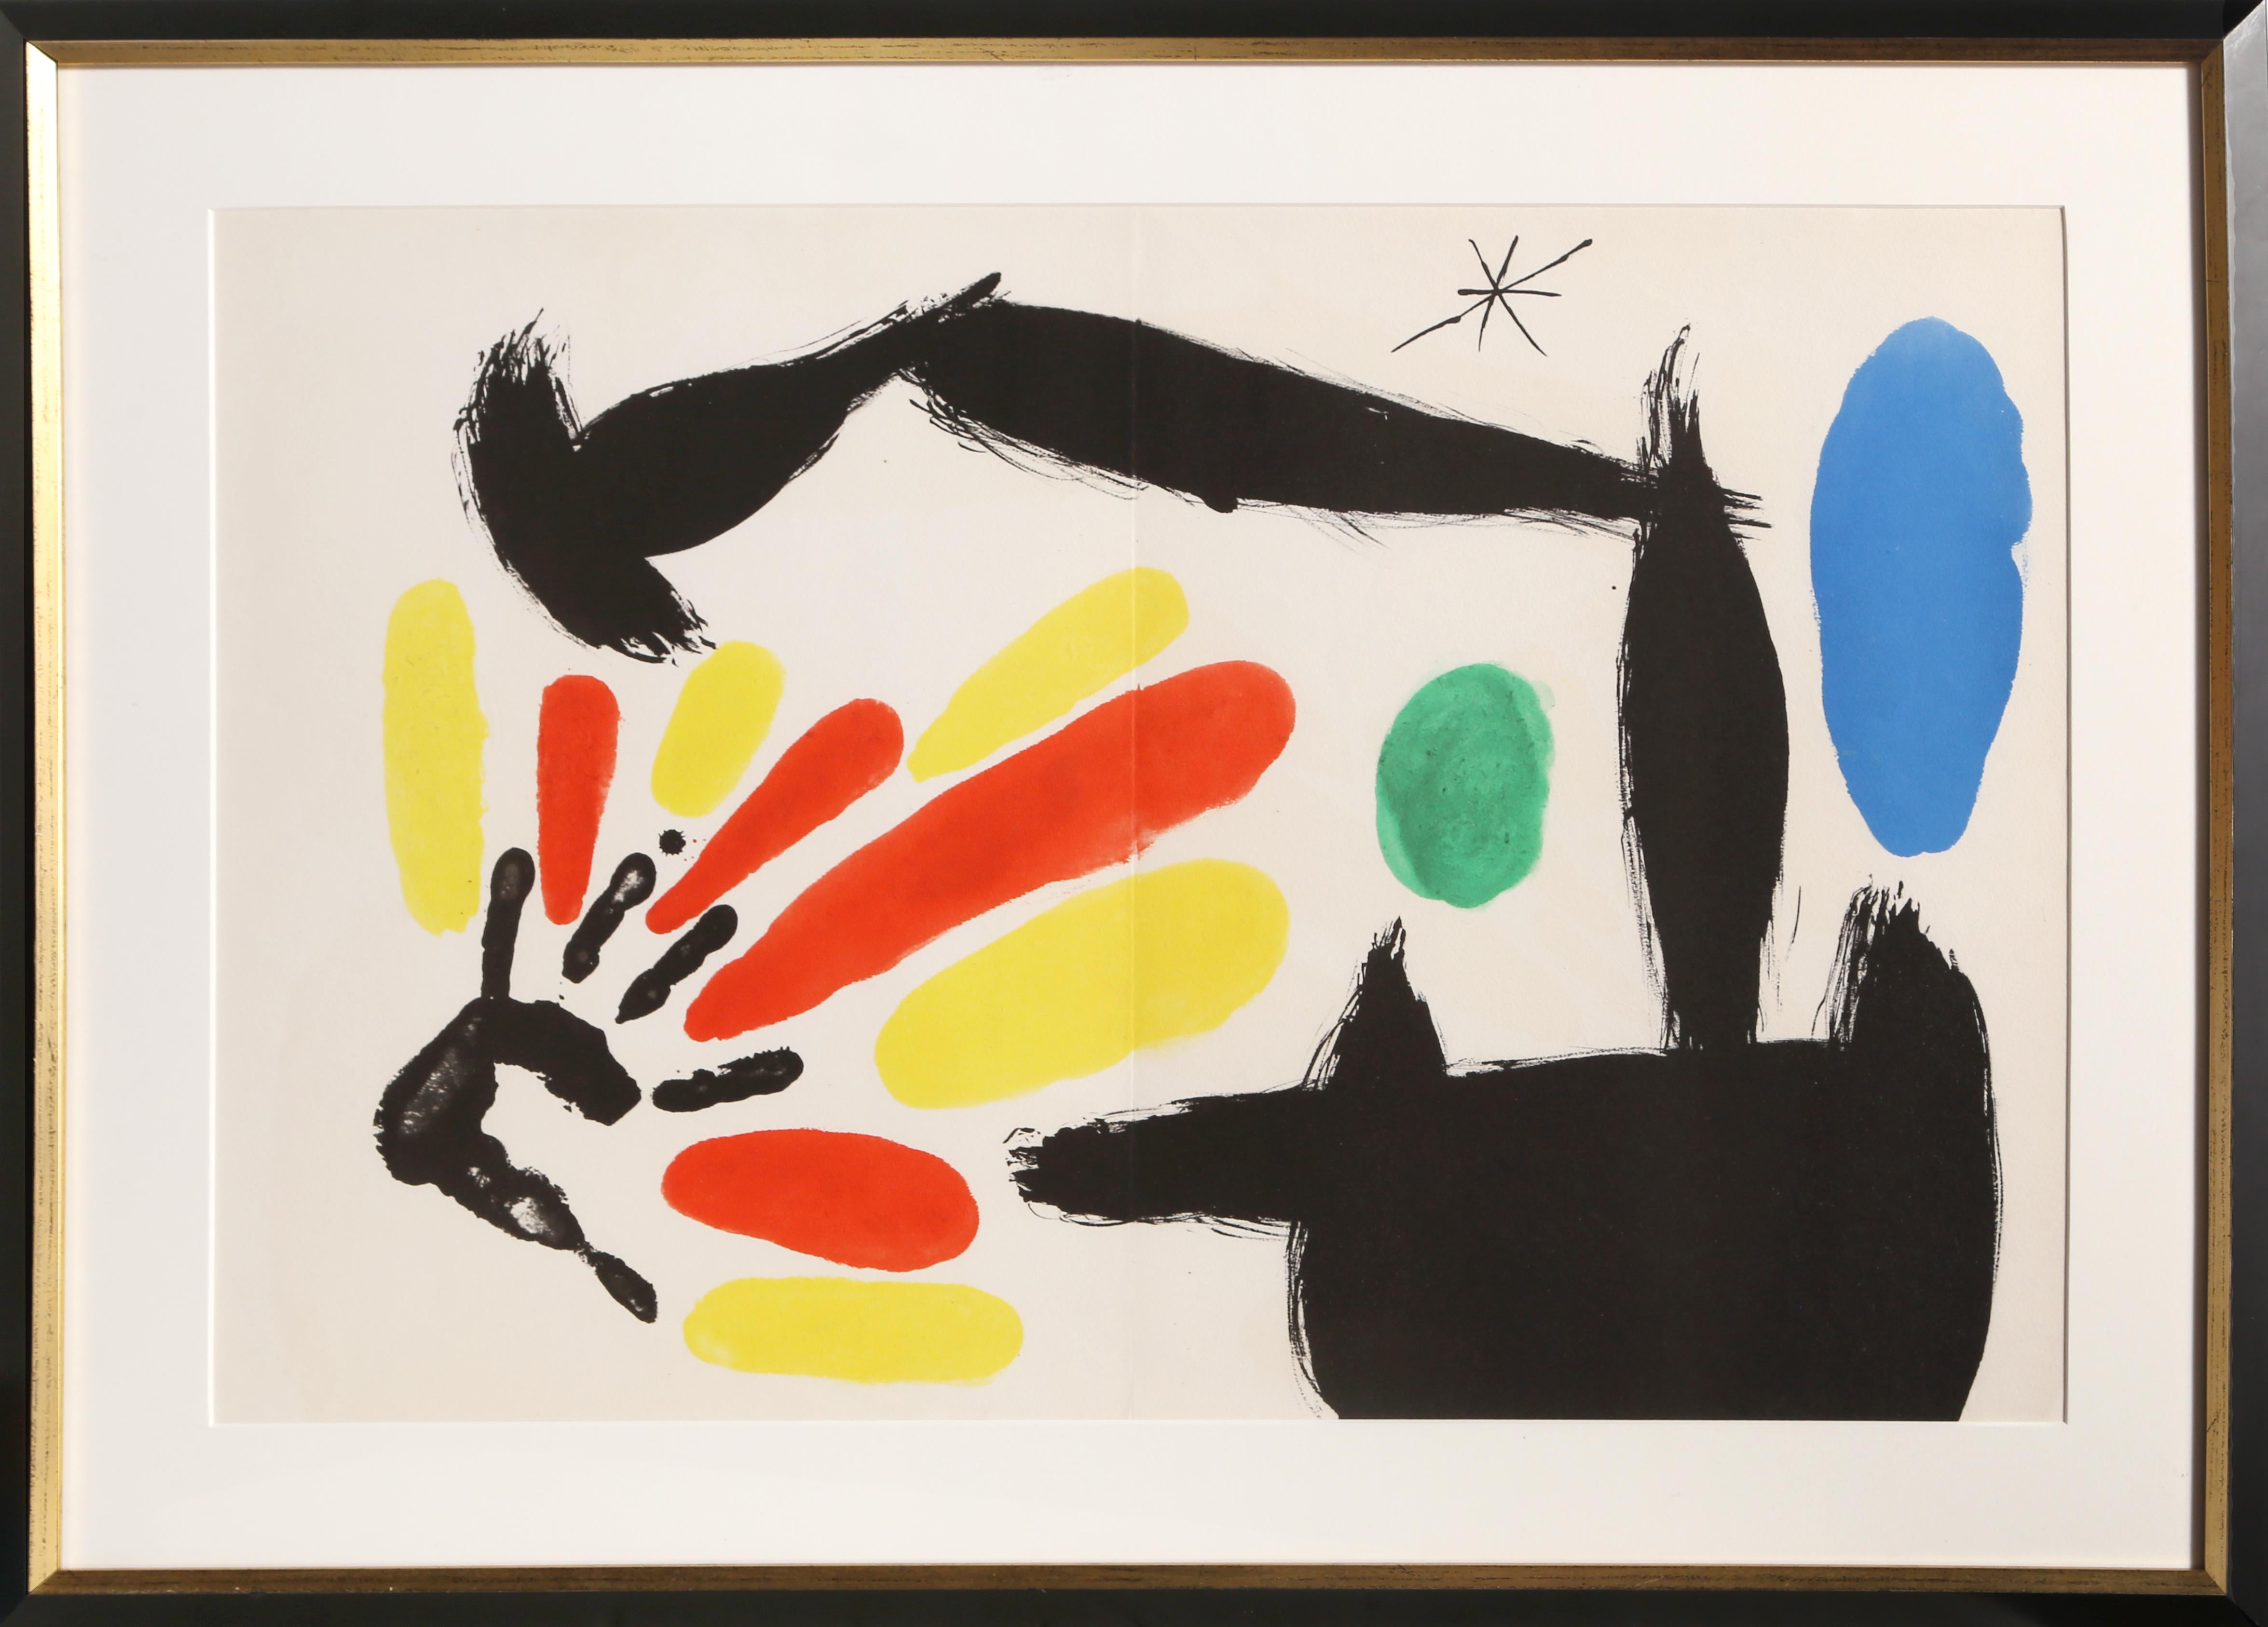 Artist: Joan Miro, Spanish (1893 - 1983)
Title: Les Essencies de la Tierra
Year: 1968
Medium: Lithograph on Guarro
Edition: LX (60)
Size: 19.25  x 30.5 in. (48.9  x 77.47 cm)
Frame Size: 25.5 x 36 inches

Reference: no. 123 in Cramer "The